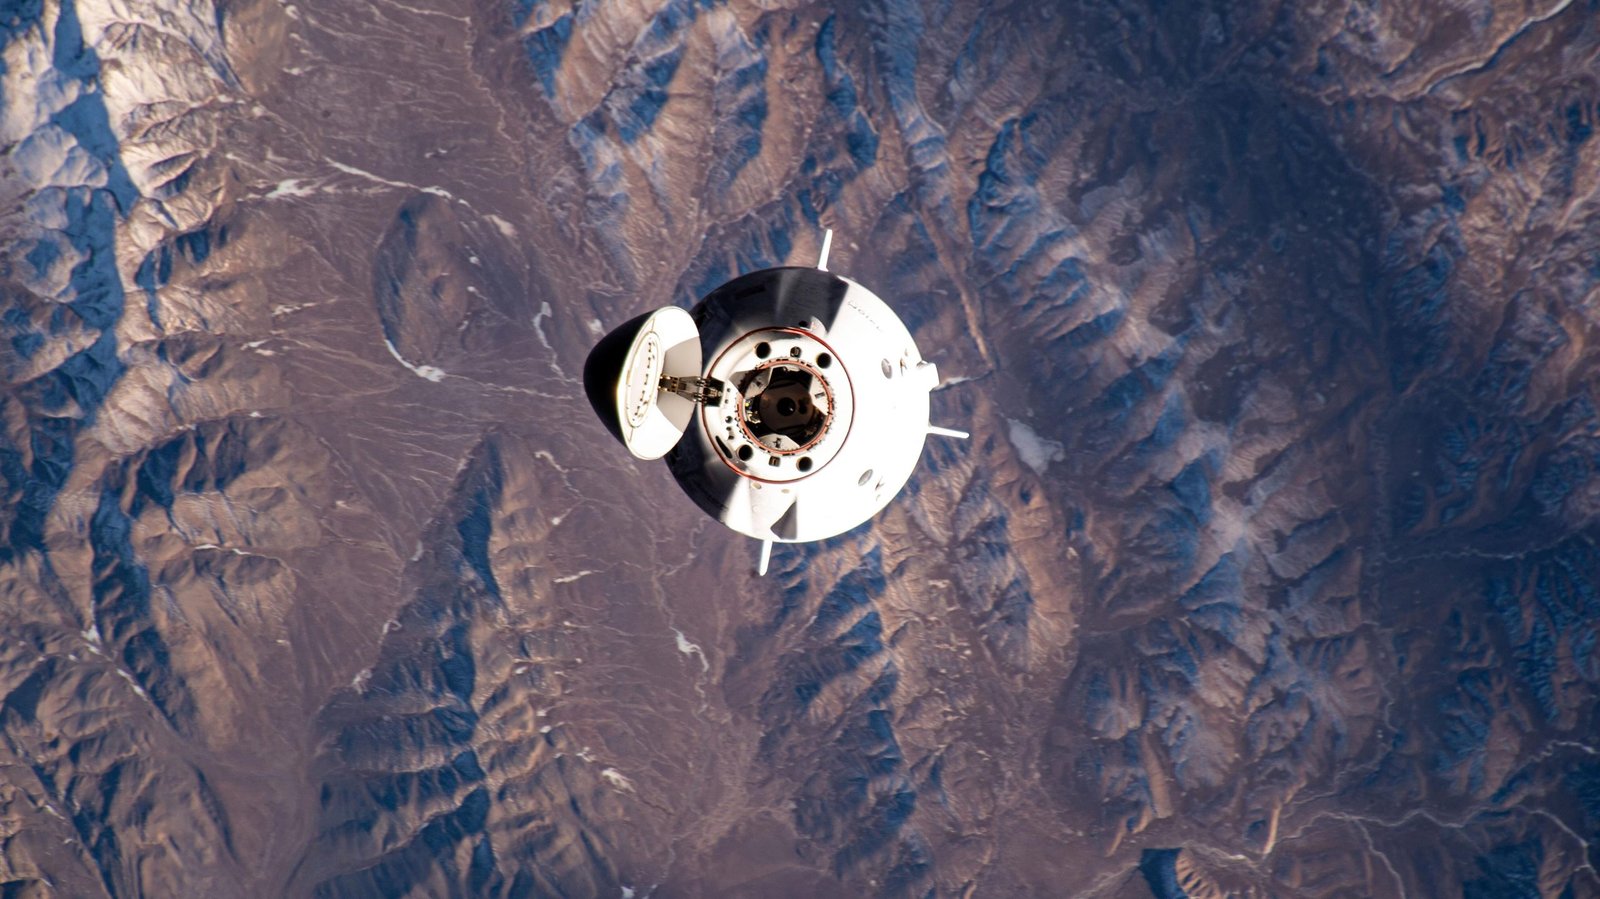 NASA Coverage of Axiom Mission 3 Departure From Space Station